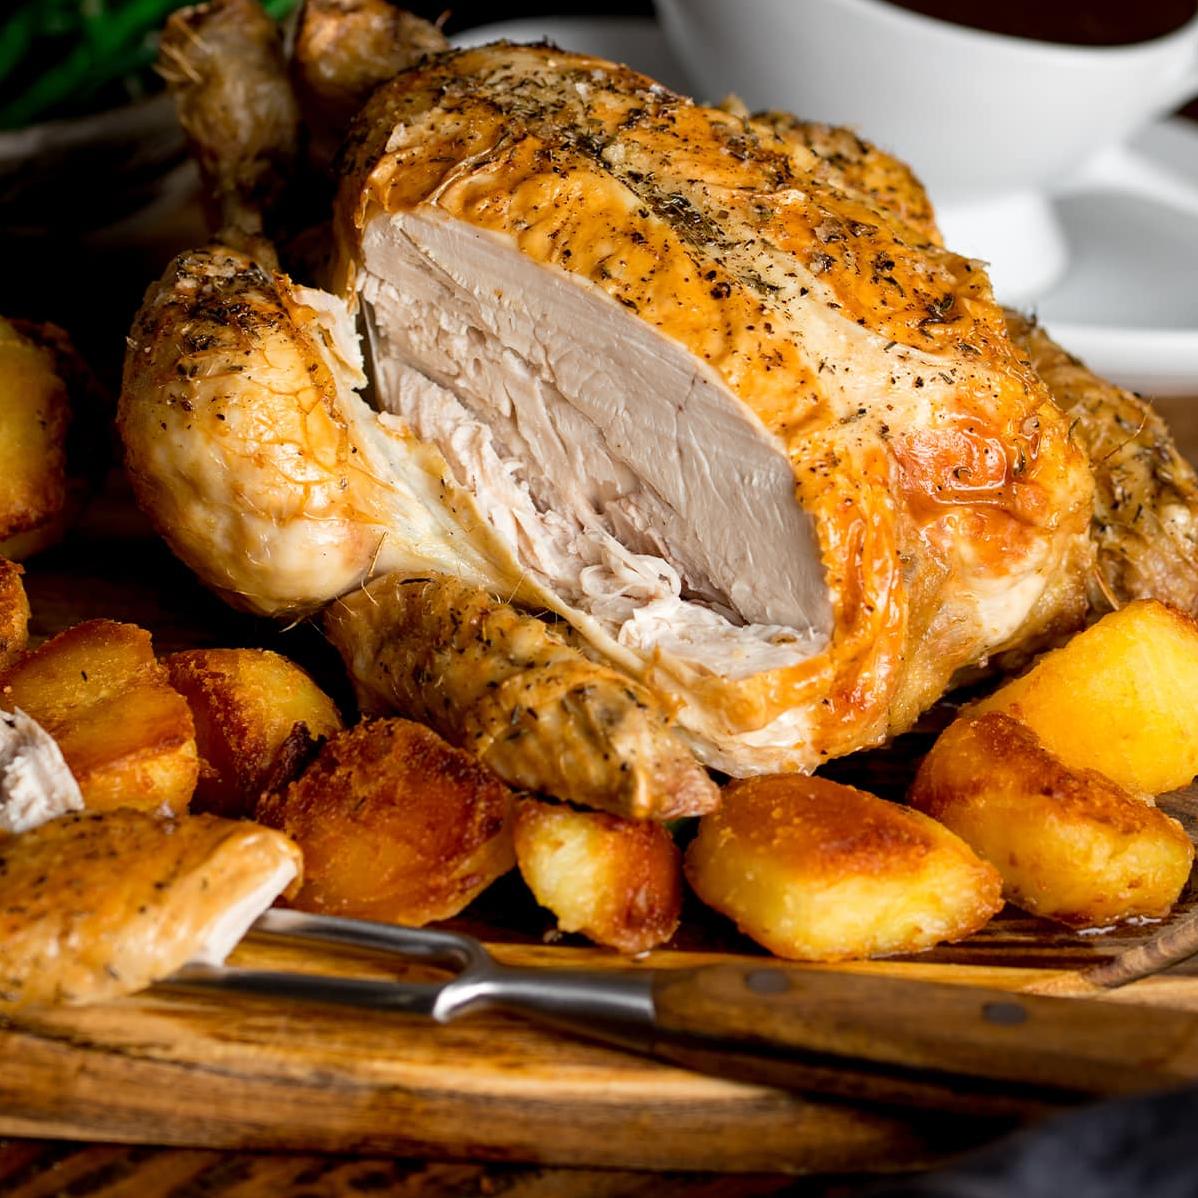  Perfectly roasted chicken infused with flavorful herbs and spices, served with homemade gravy on the side